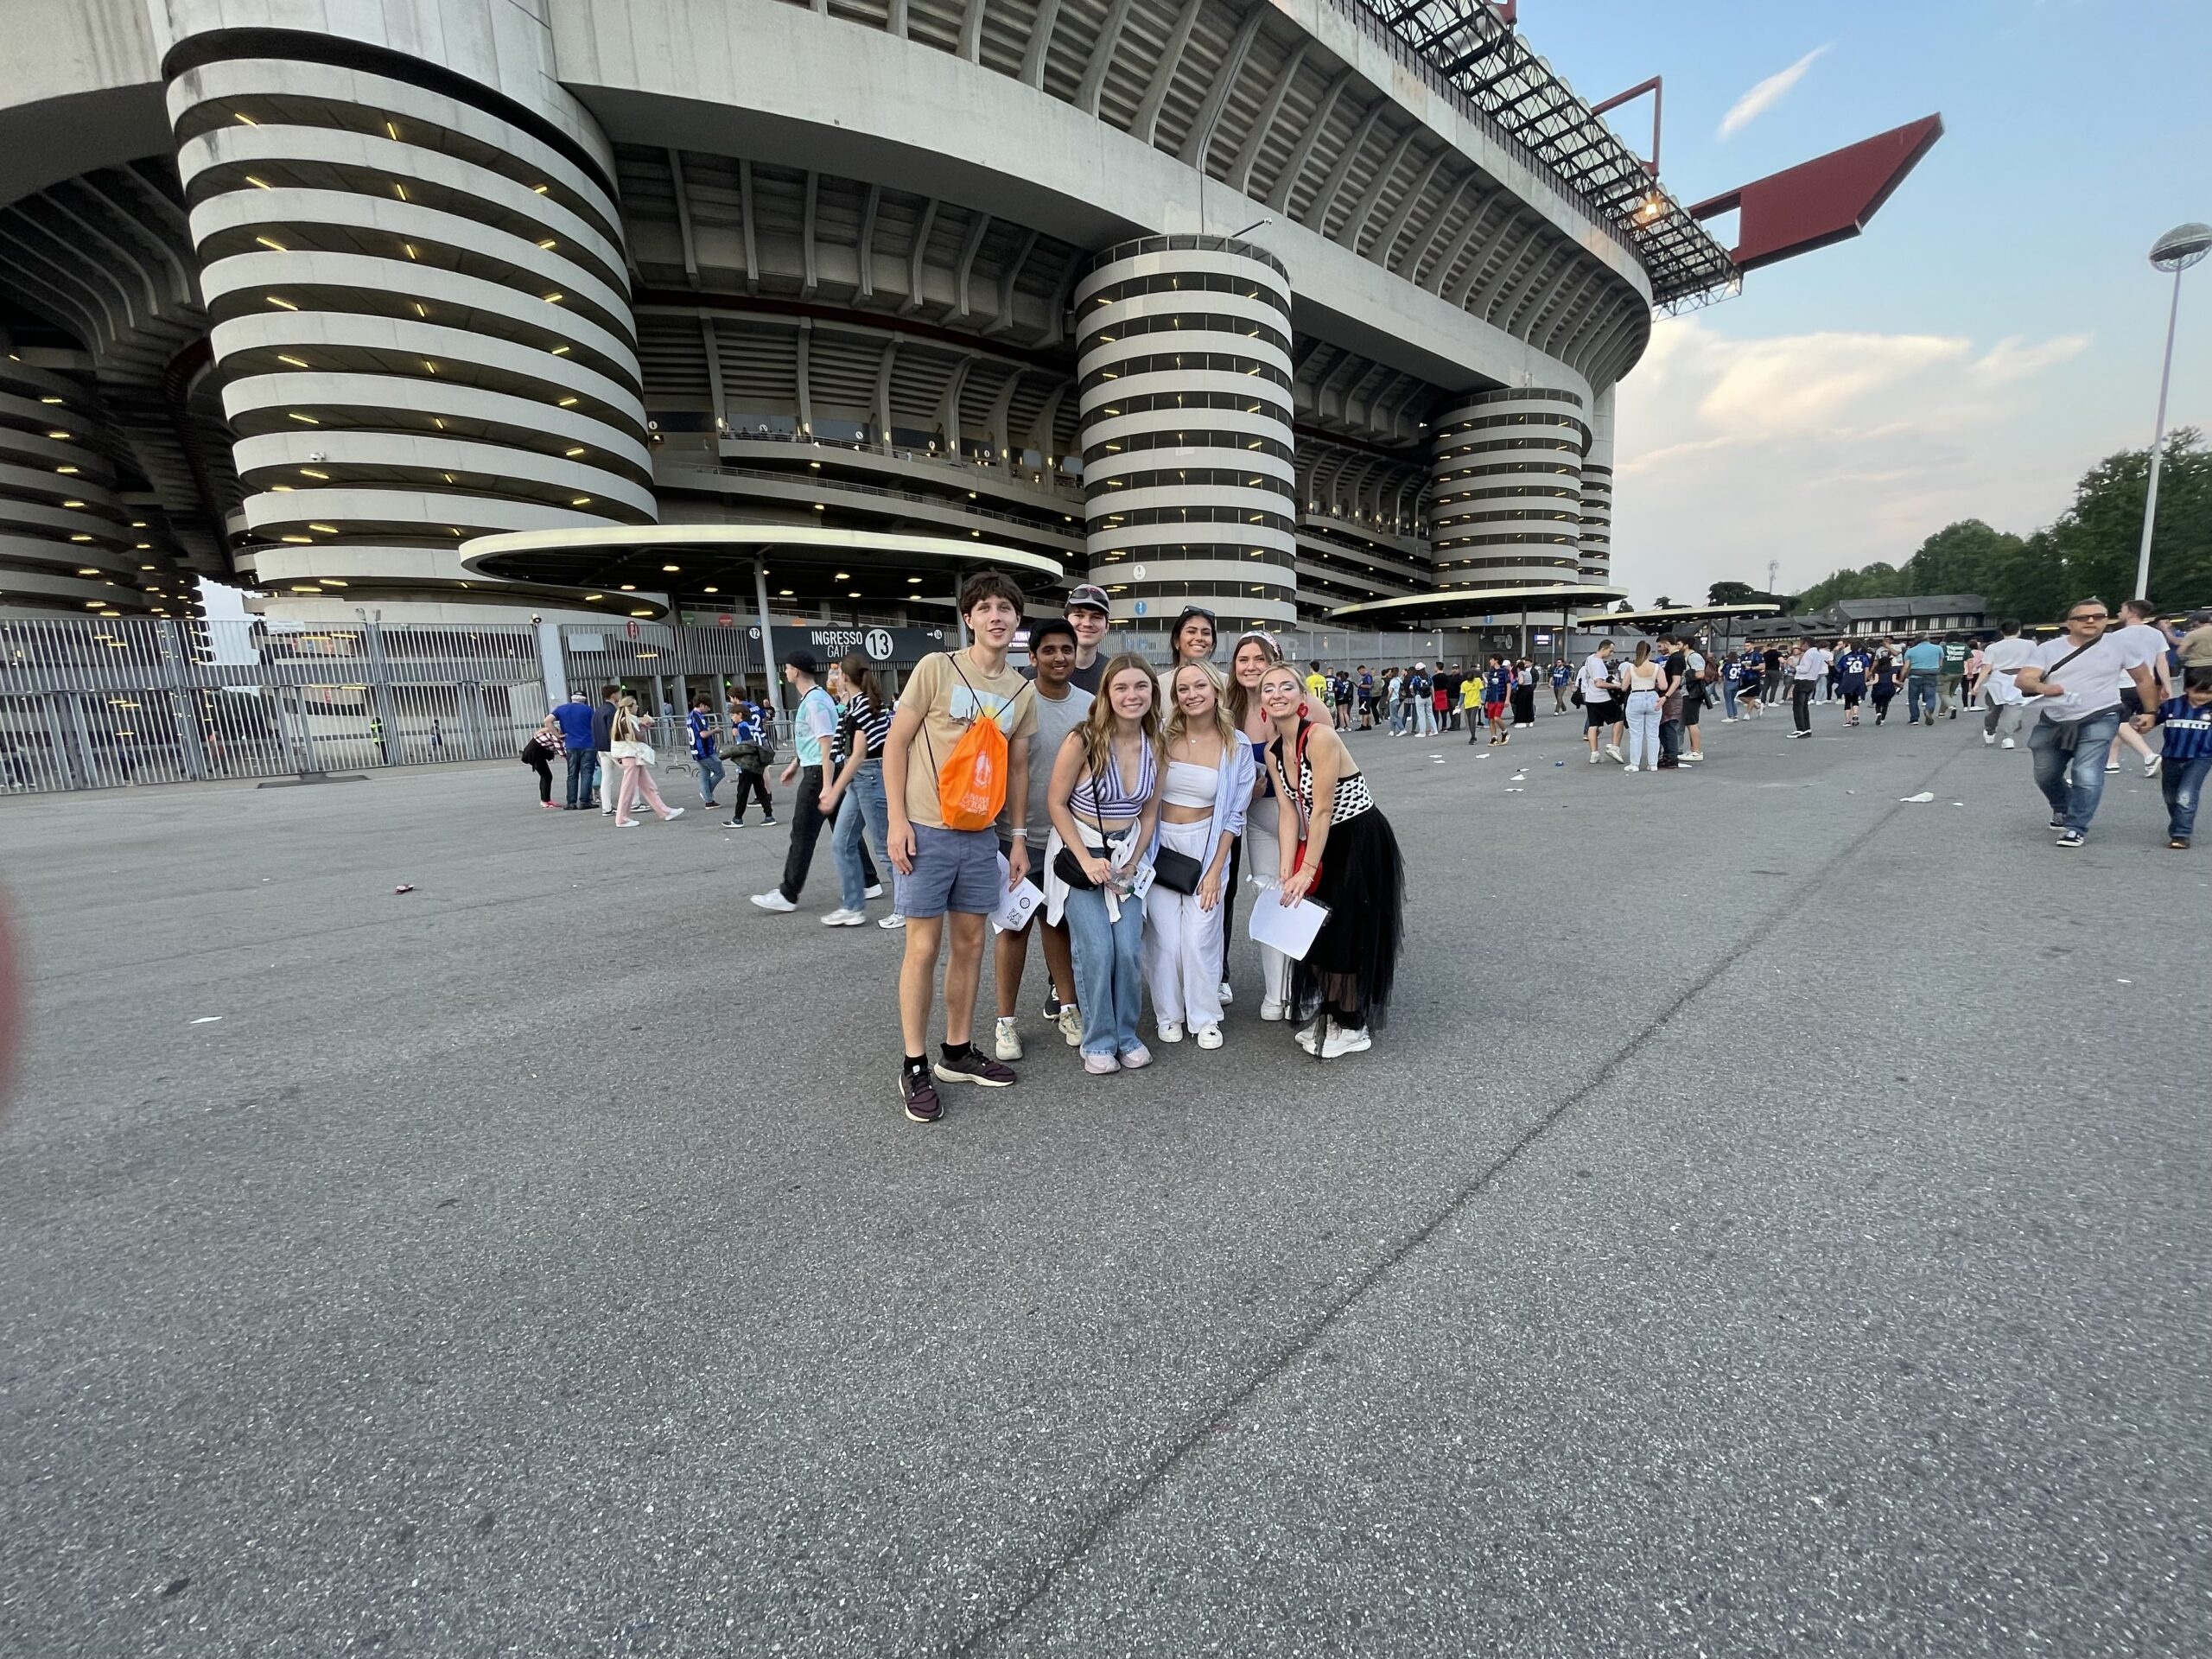 Emma posing with friends in front of the Milan soccer stadium.